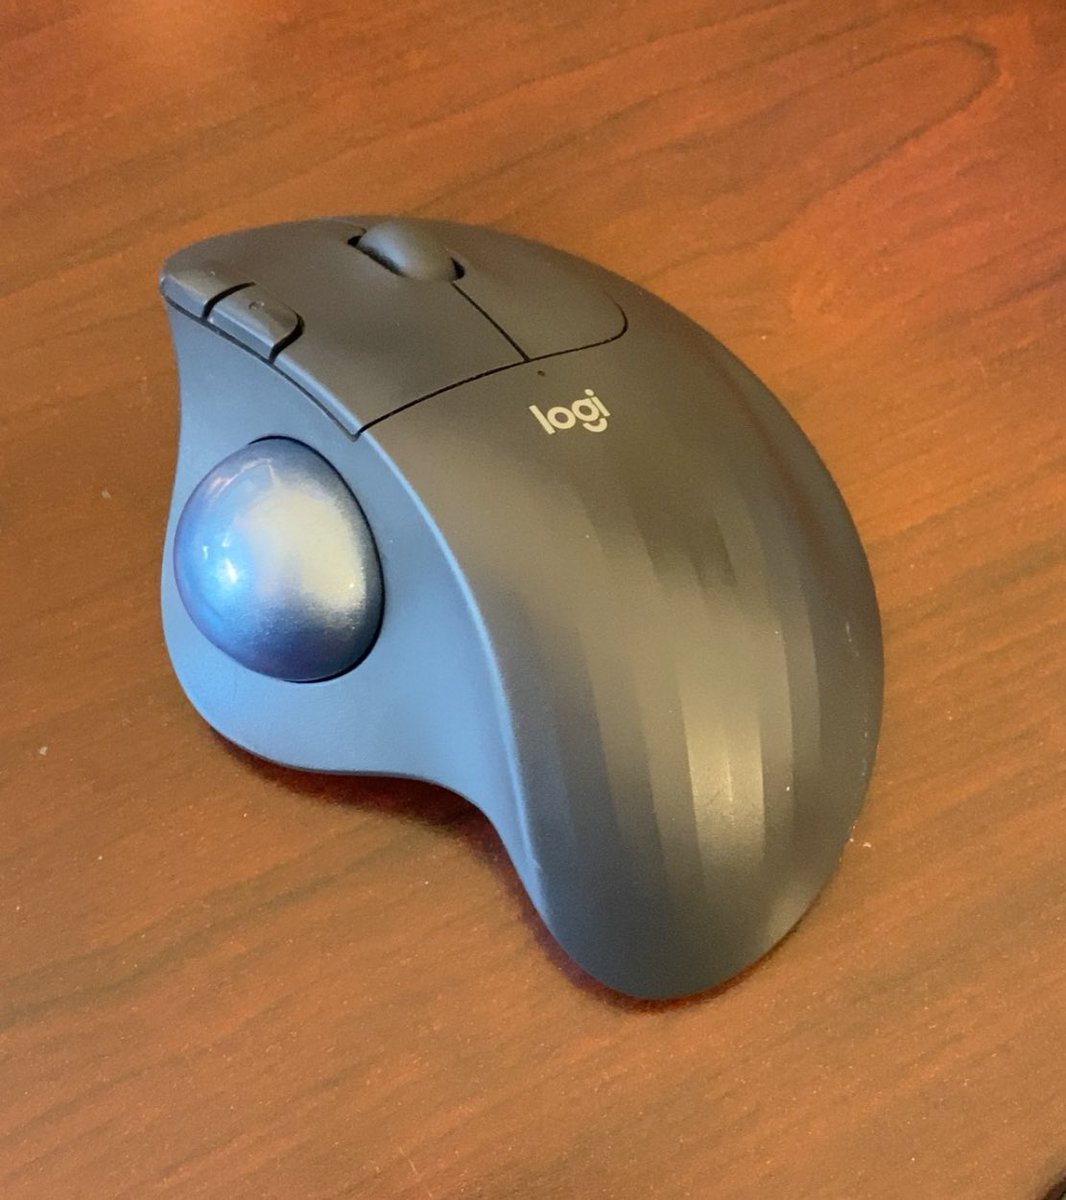 2. Trackball mouse

When I DO use a mouse, I prefer a trackball mouse. Again, not everyone’s fav but I love mine. Less small wrist movement = healthier wrists